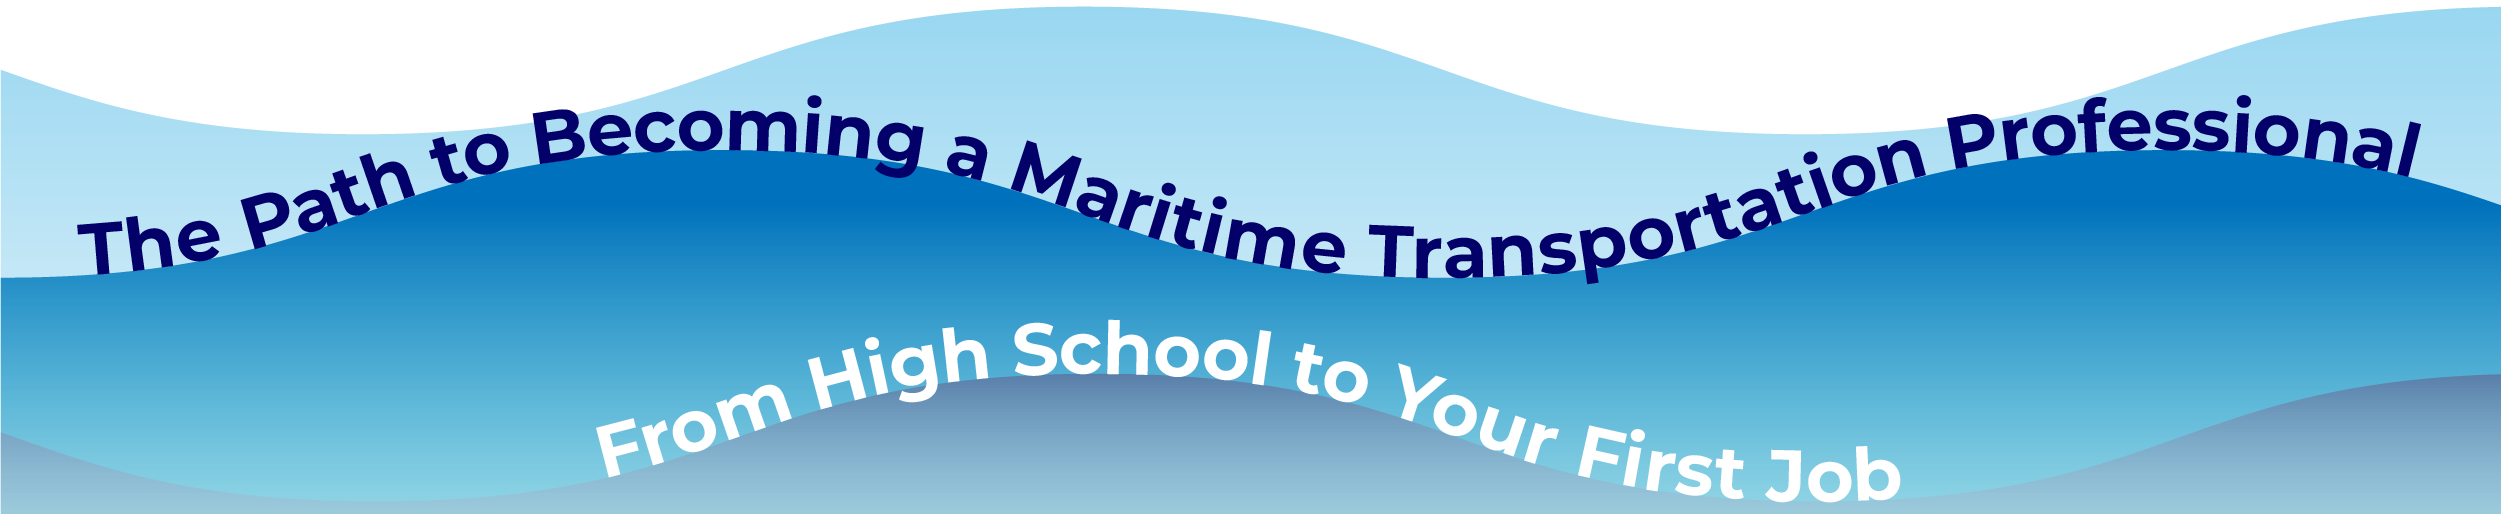 The path to becoming a maritime transportation professional